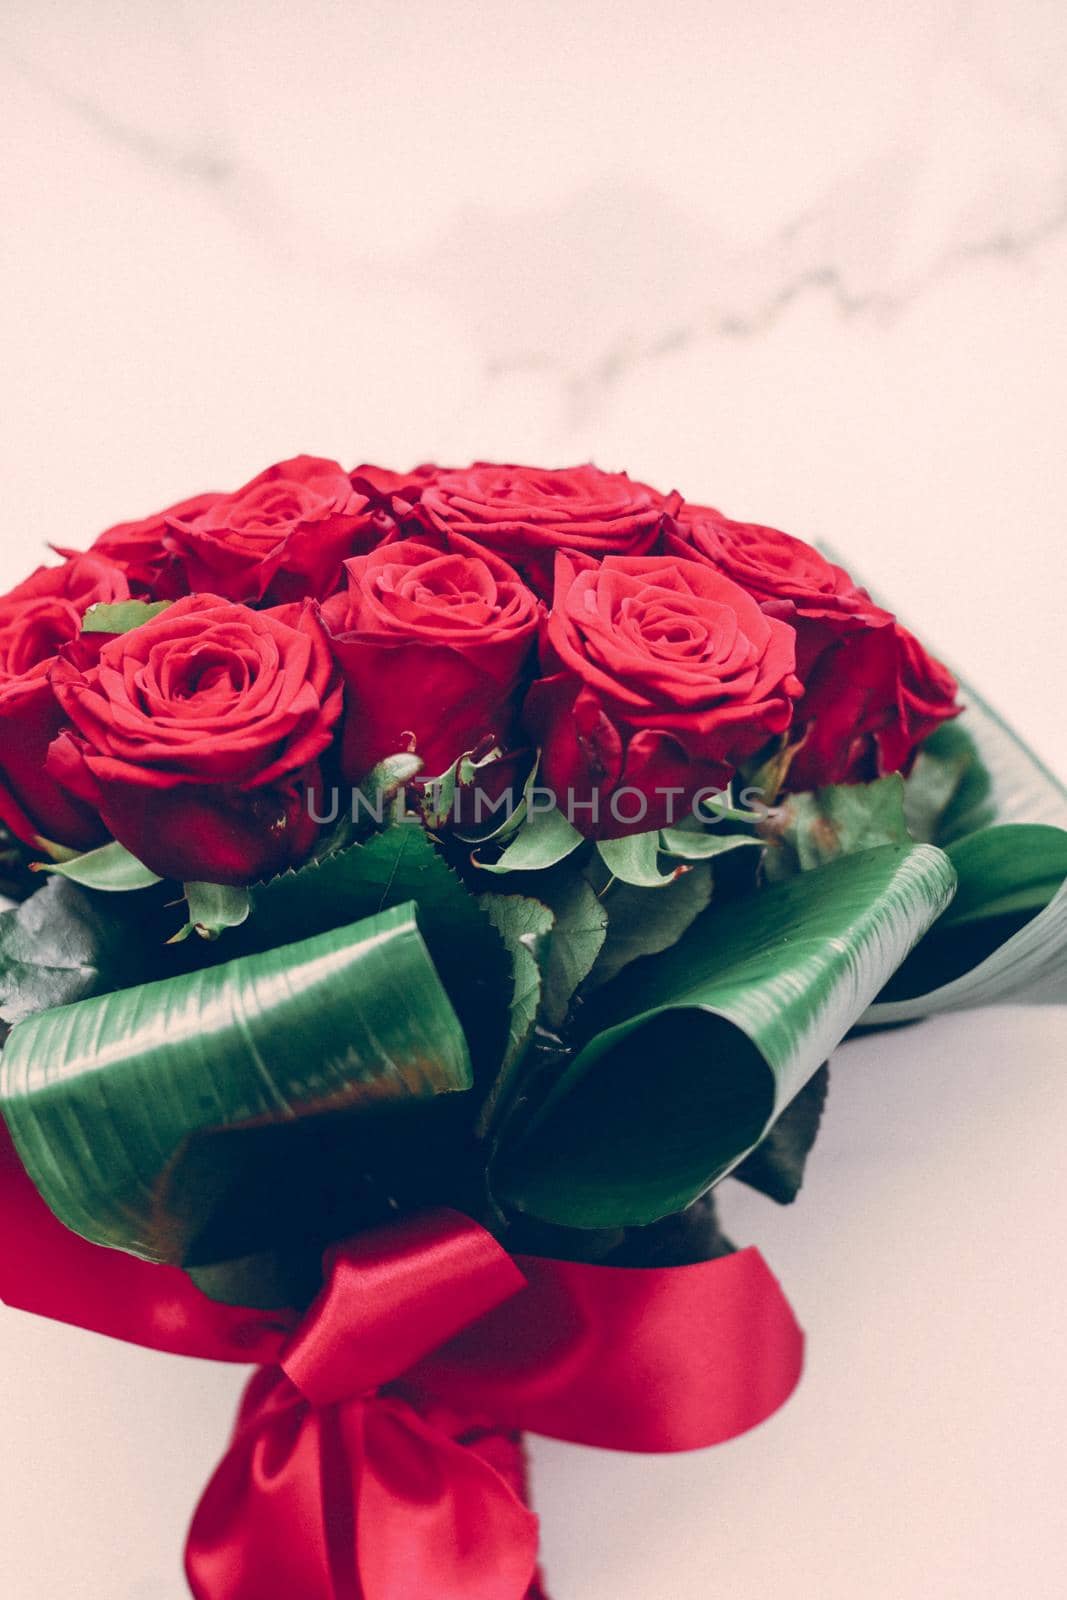 Gift for her, romantic relationship and floral design concept - Luxury bouquet of red roses, beautiful flowers as holiday love present on Valentines Day